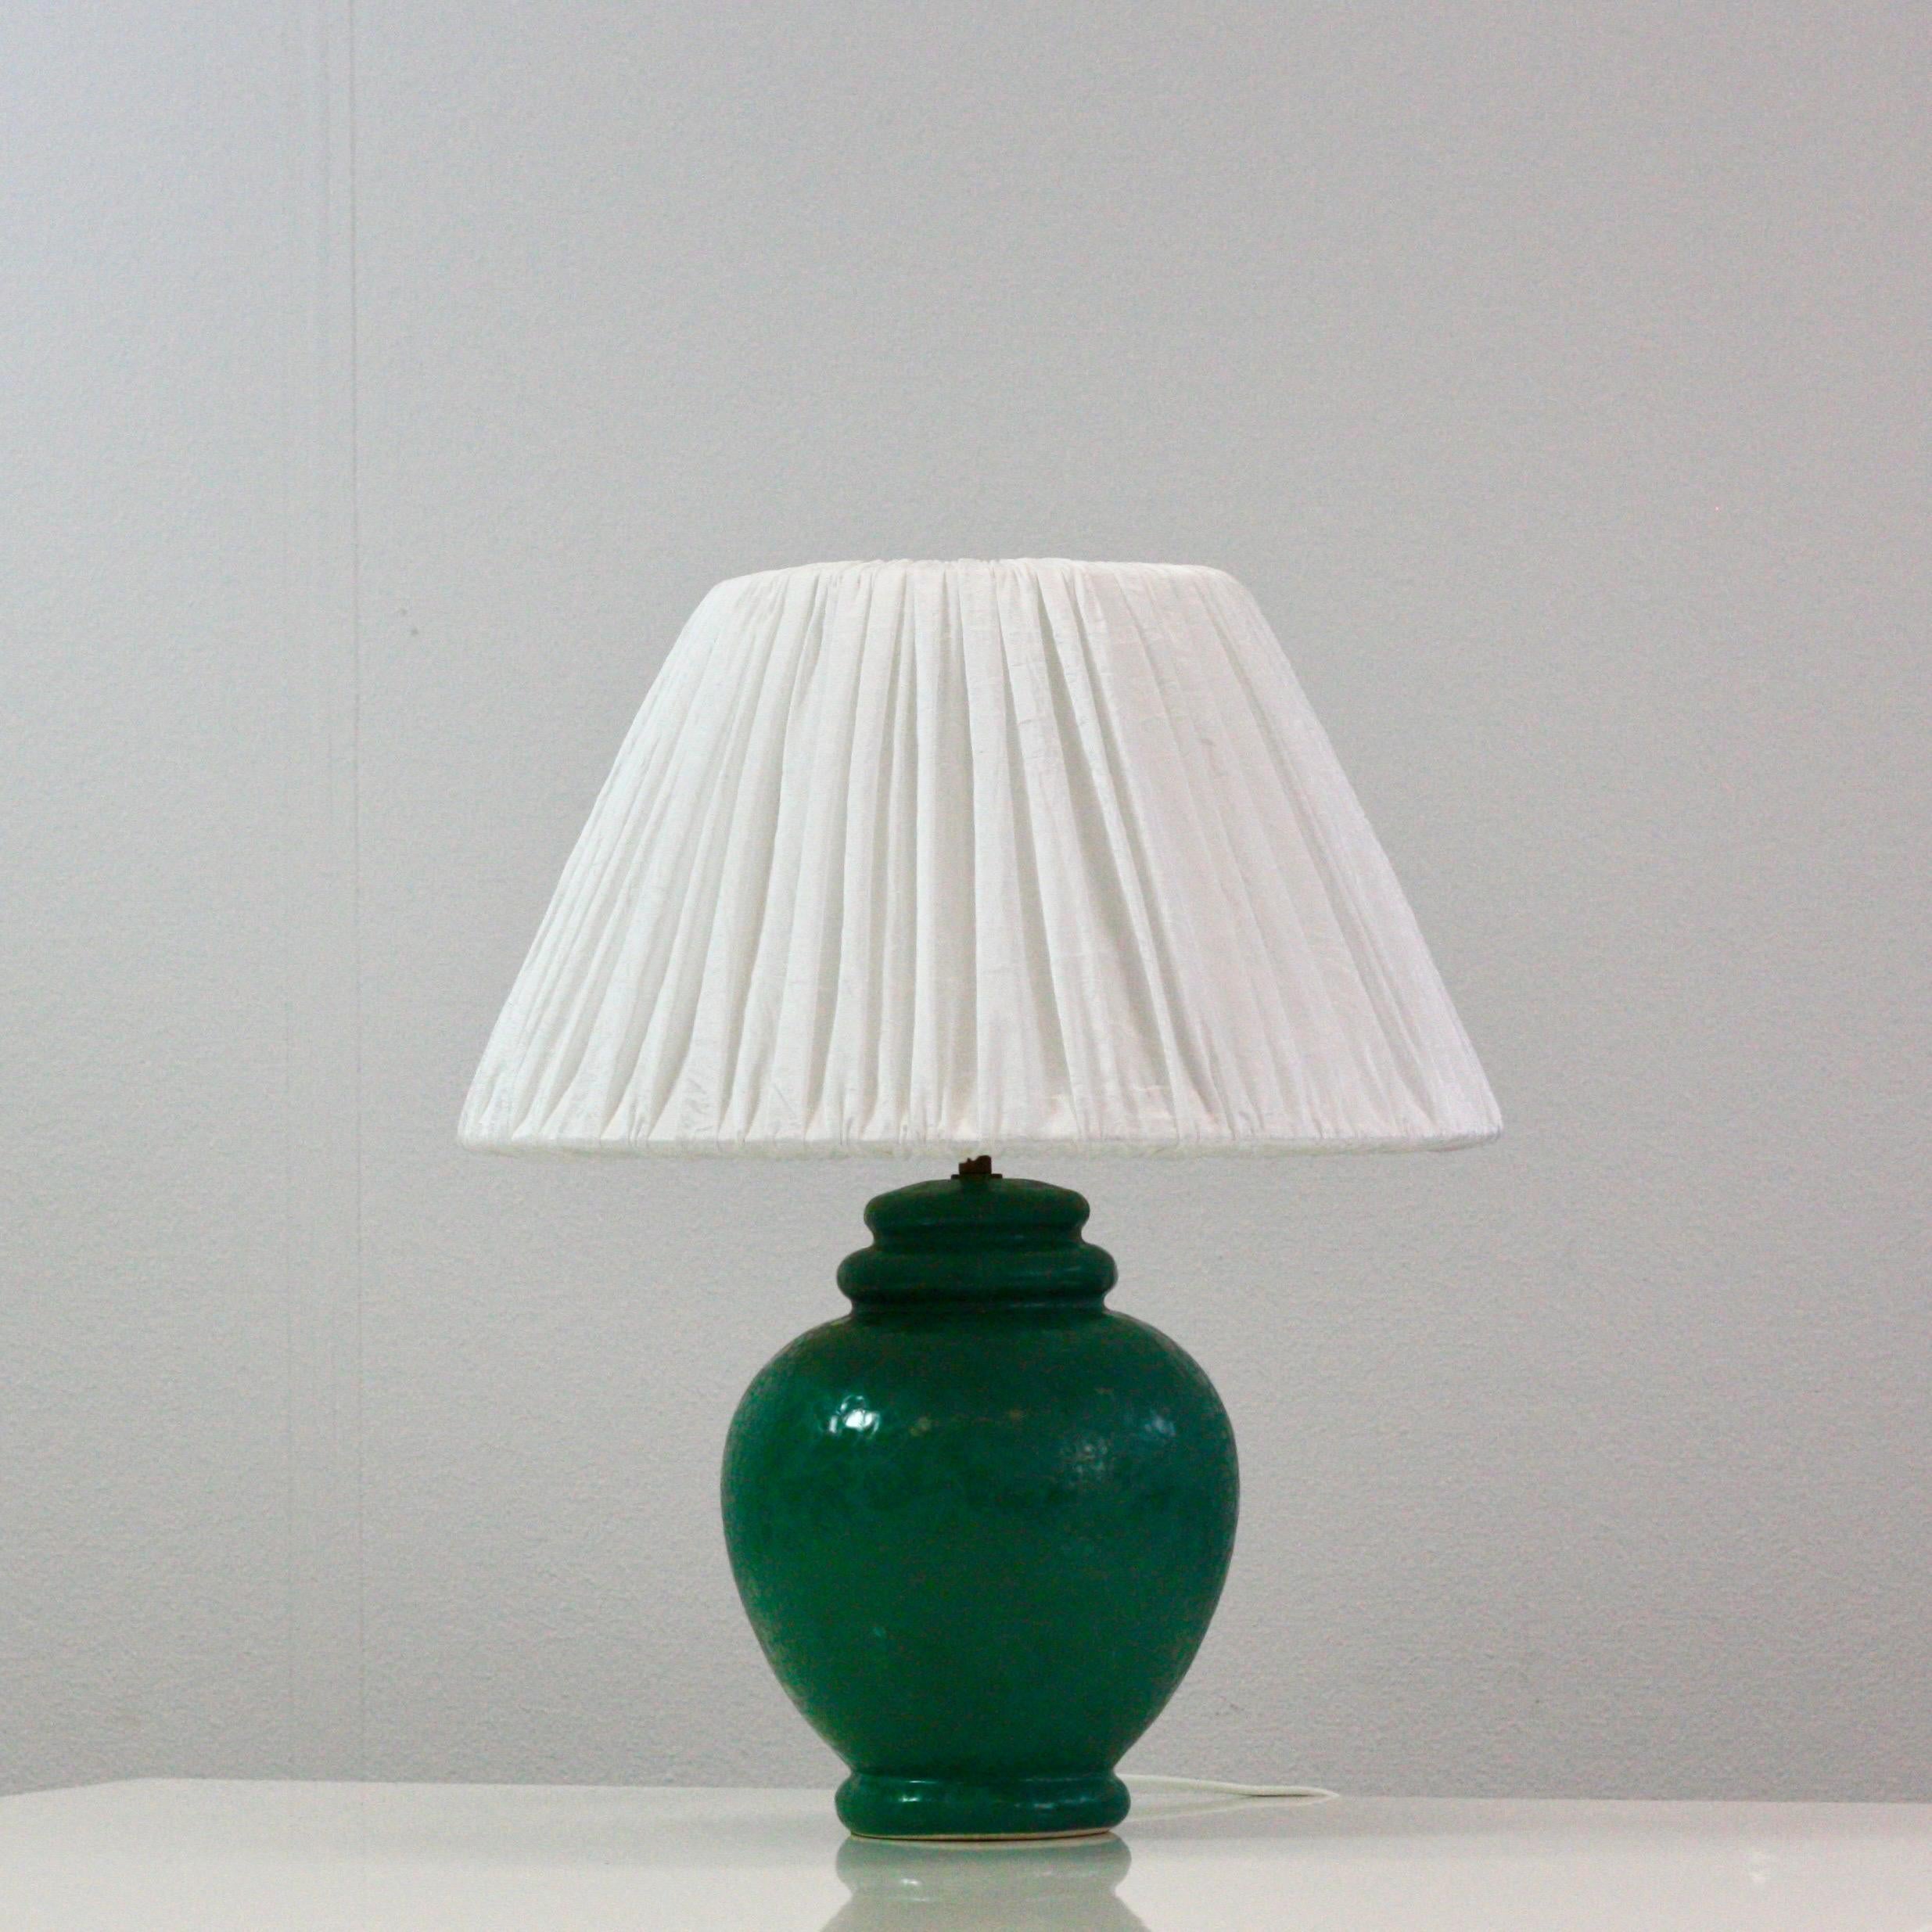 A rare ceramic by Mads Caprani for Caprani Light in excellent vintage condition. 

* A green ceramic desk lamp with a white fabric shade
* Designer: Mads Caprani
* Manufacturer: Caprani Light A/S Denmark 
* Year: 1980s
* Condition: Excellent vintage